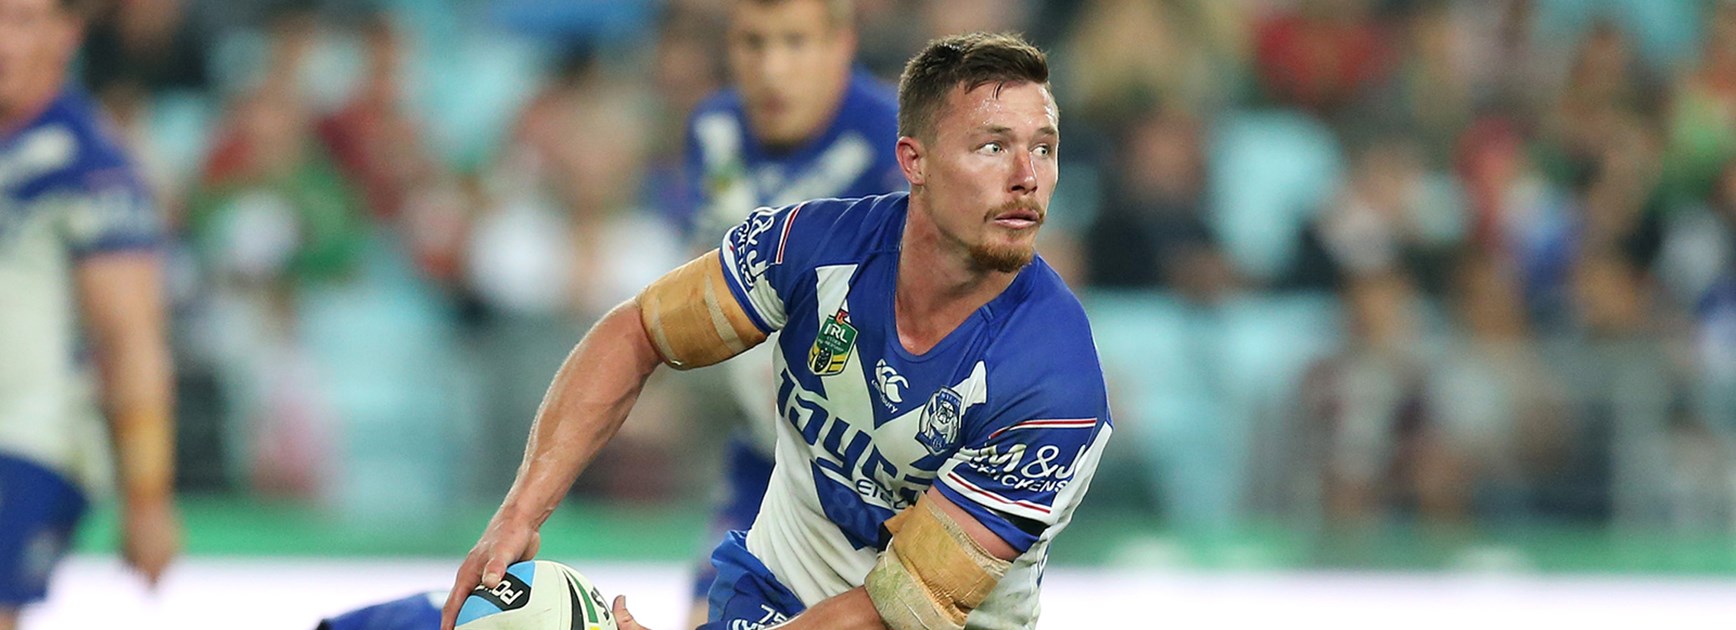 Stand-in Bulldogs hooker Damien Cook had an impressive game in his return to the NRL.